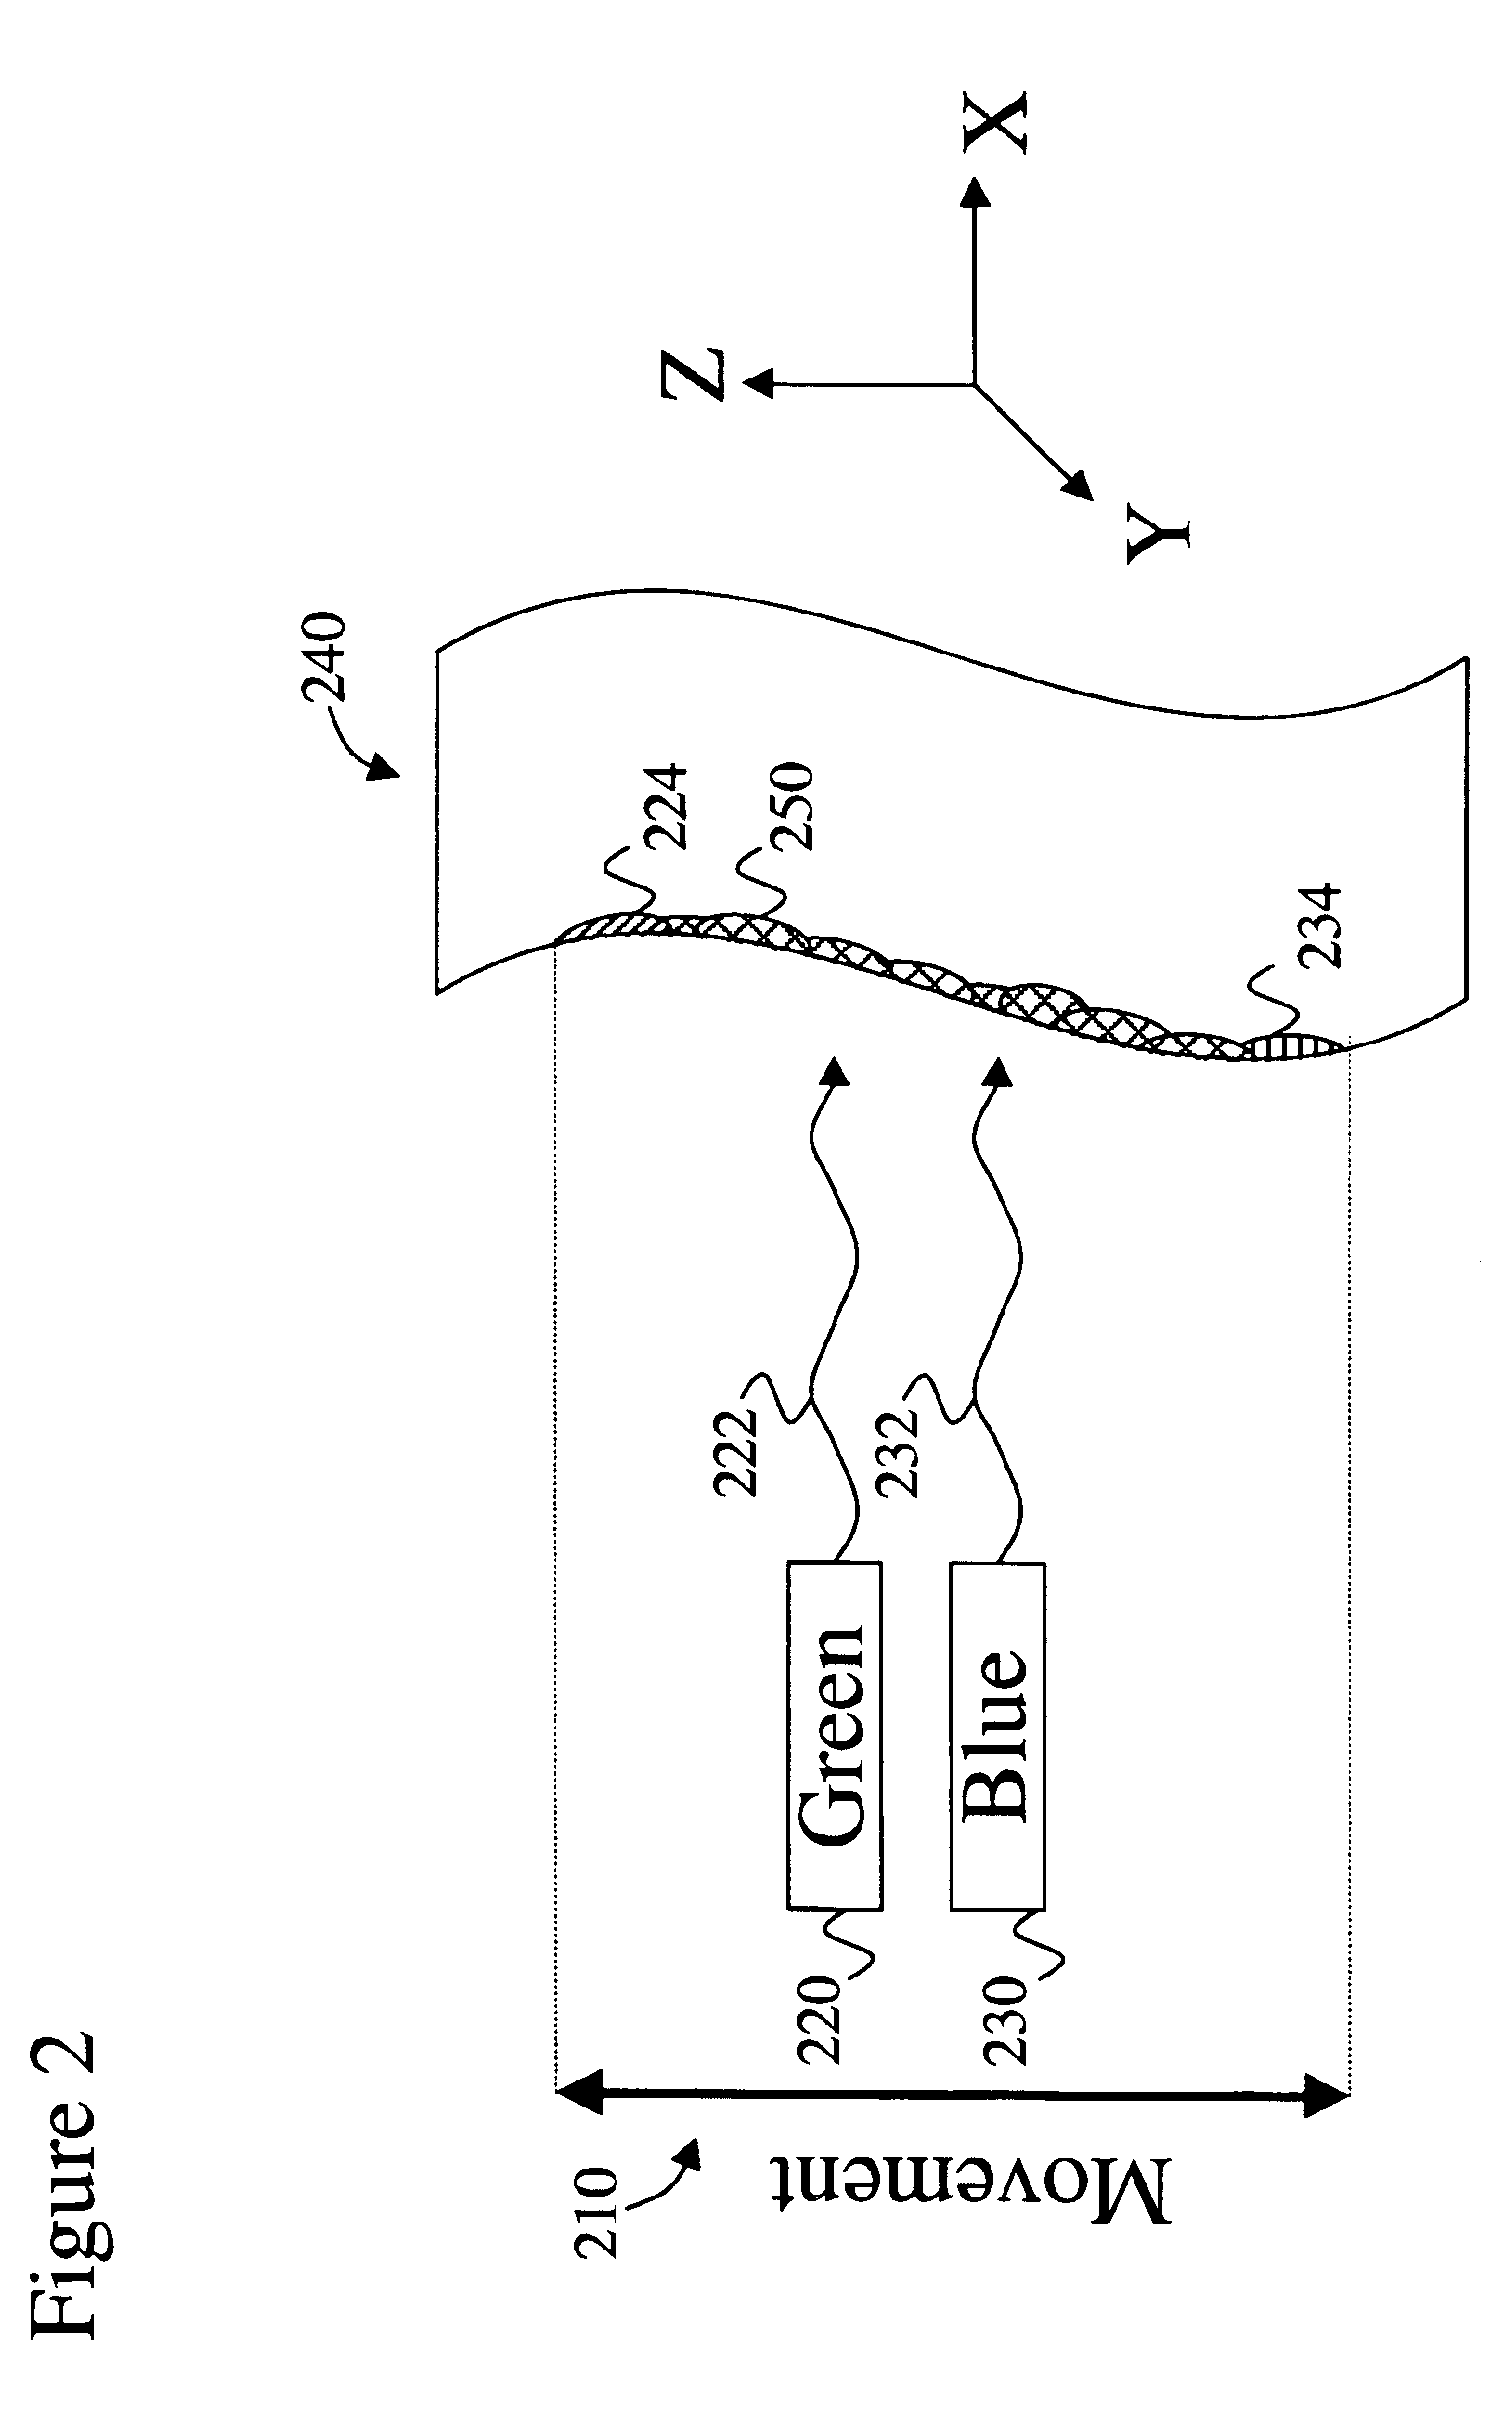 Toothpick for light treatment of body structures